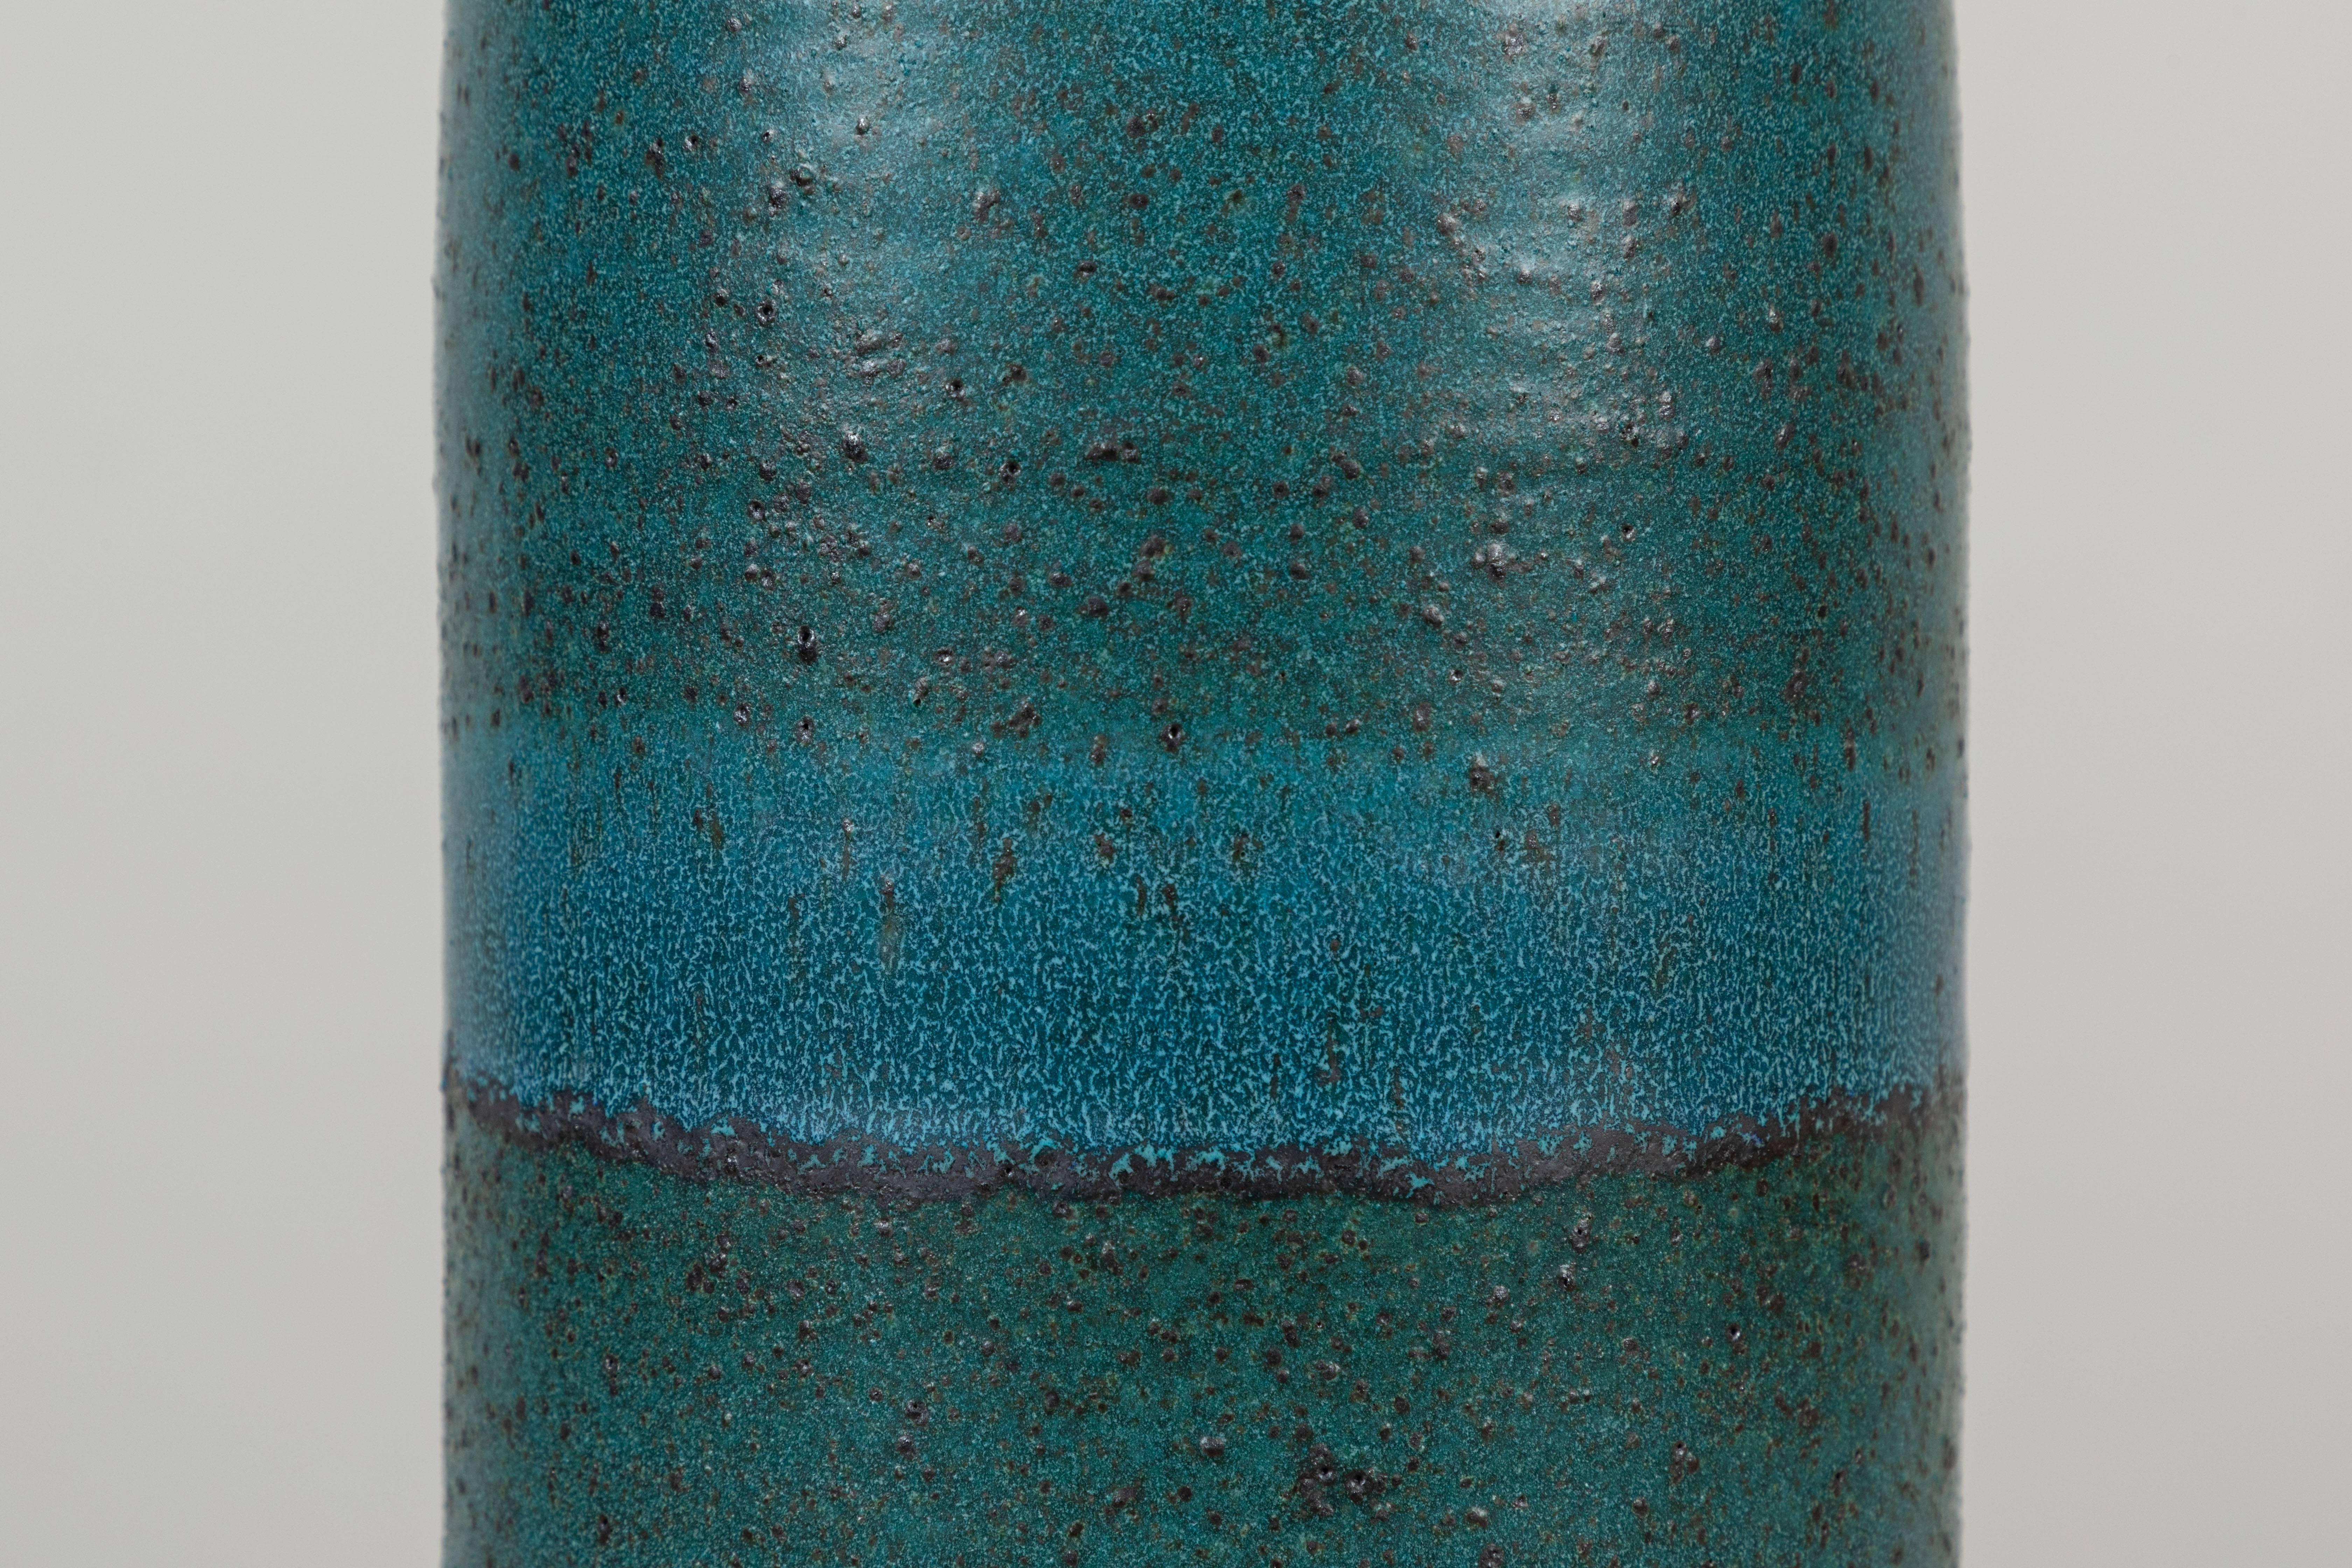 Mid-Century Modern Extra Large Turquoise Bottle Lamp by Victoria Morris for Lawson-Fenning